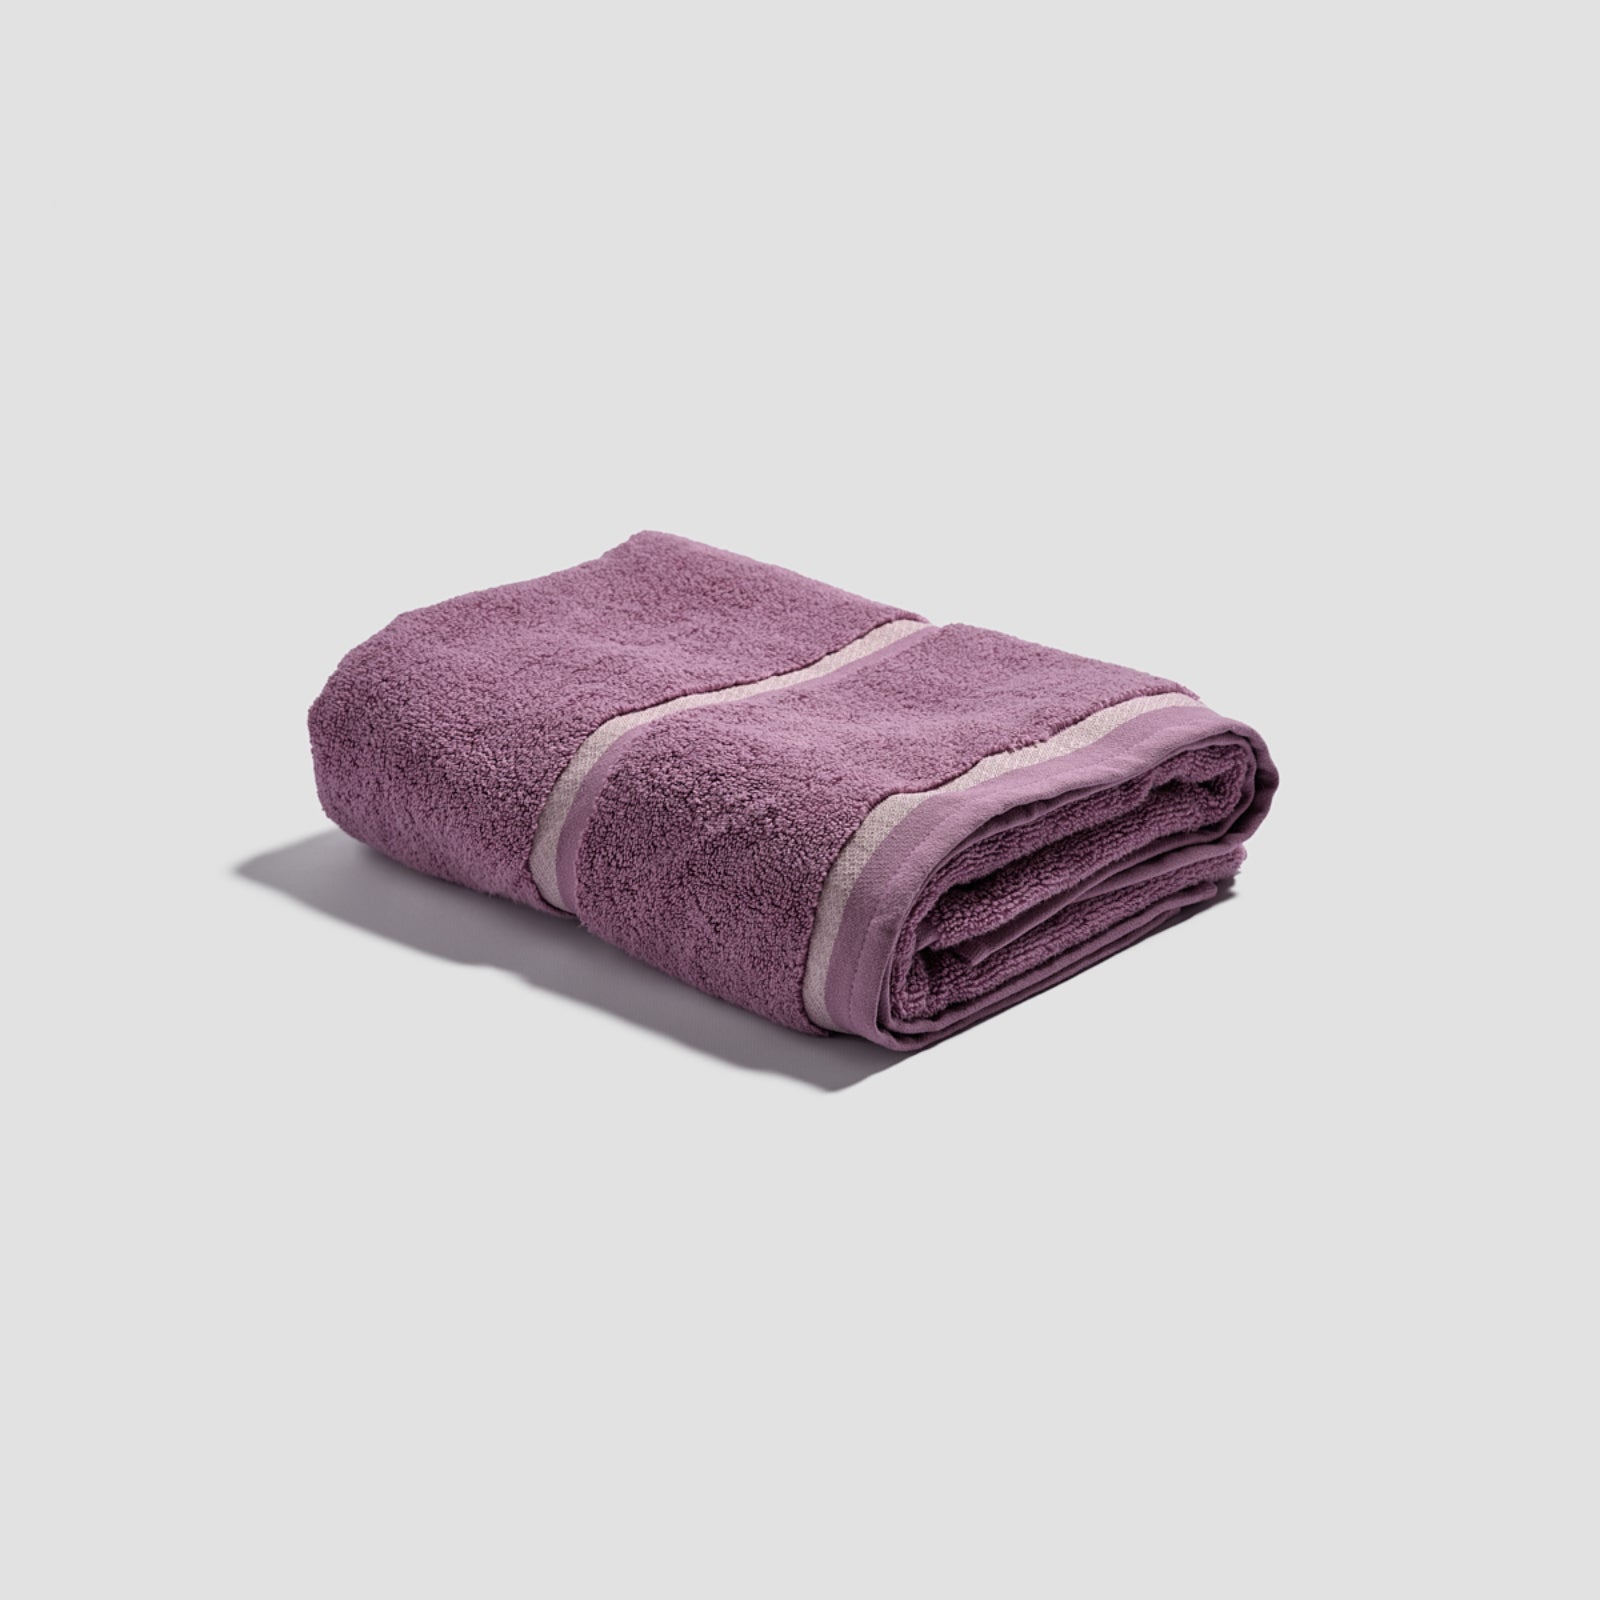 Orchid Bath Towel - Piglet in Bed